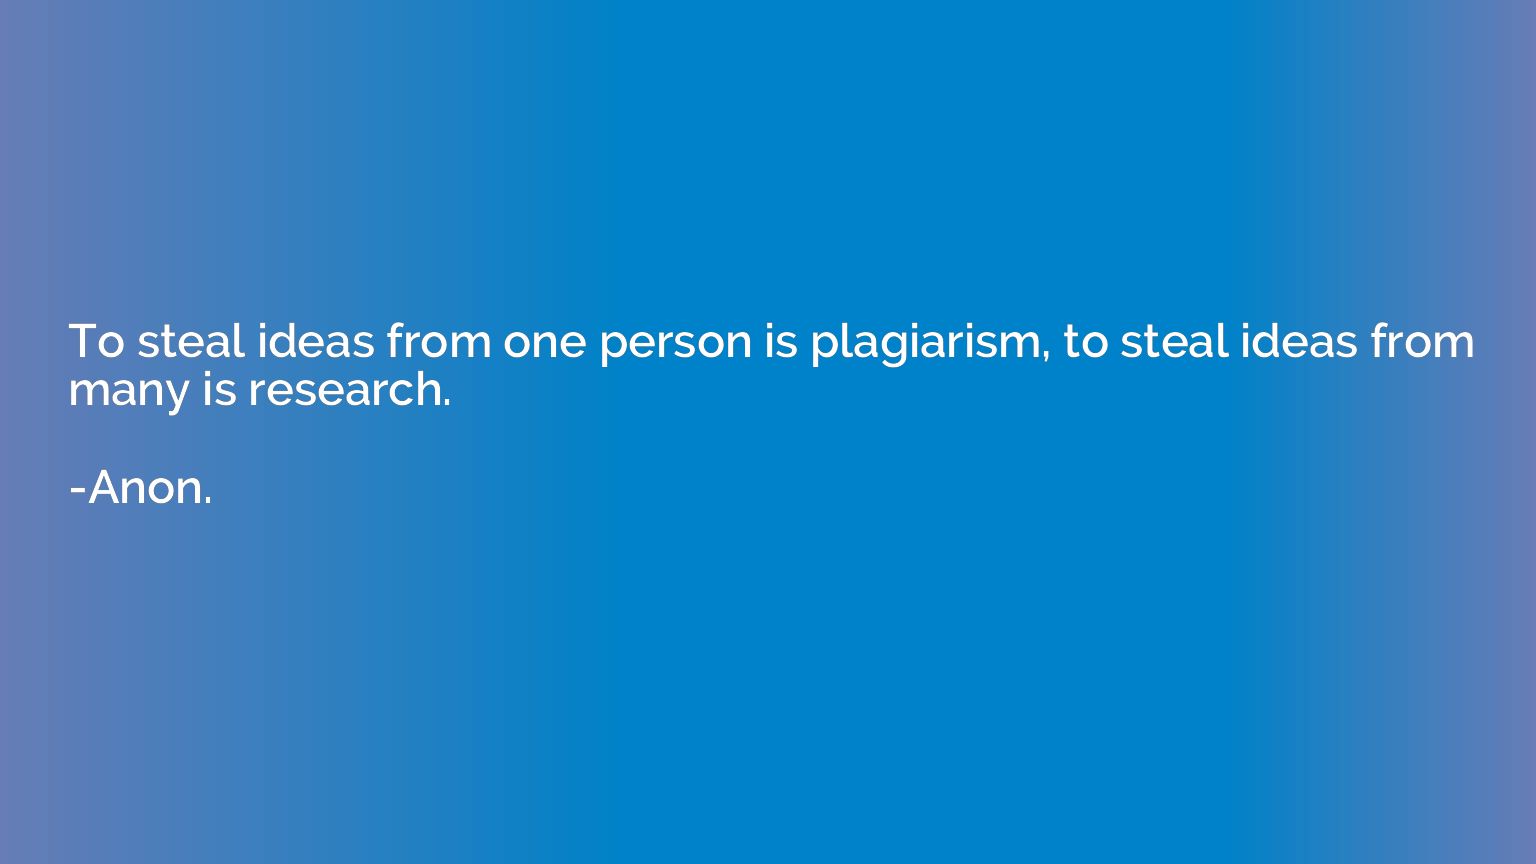 To steal ideas from one person is plagiarism, to steal ideas